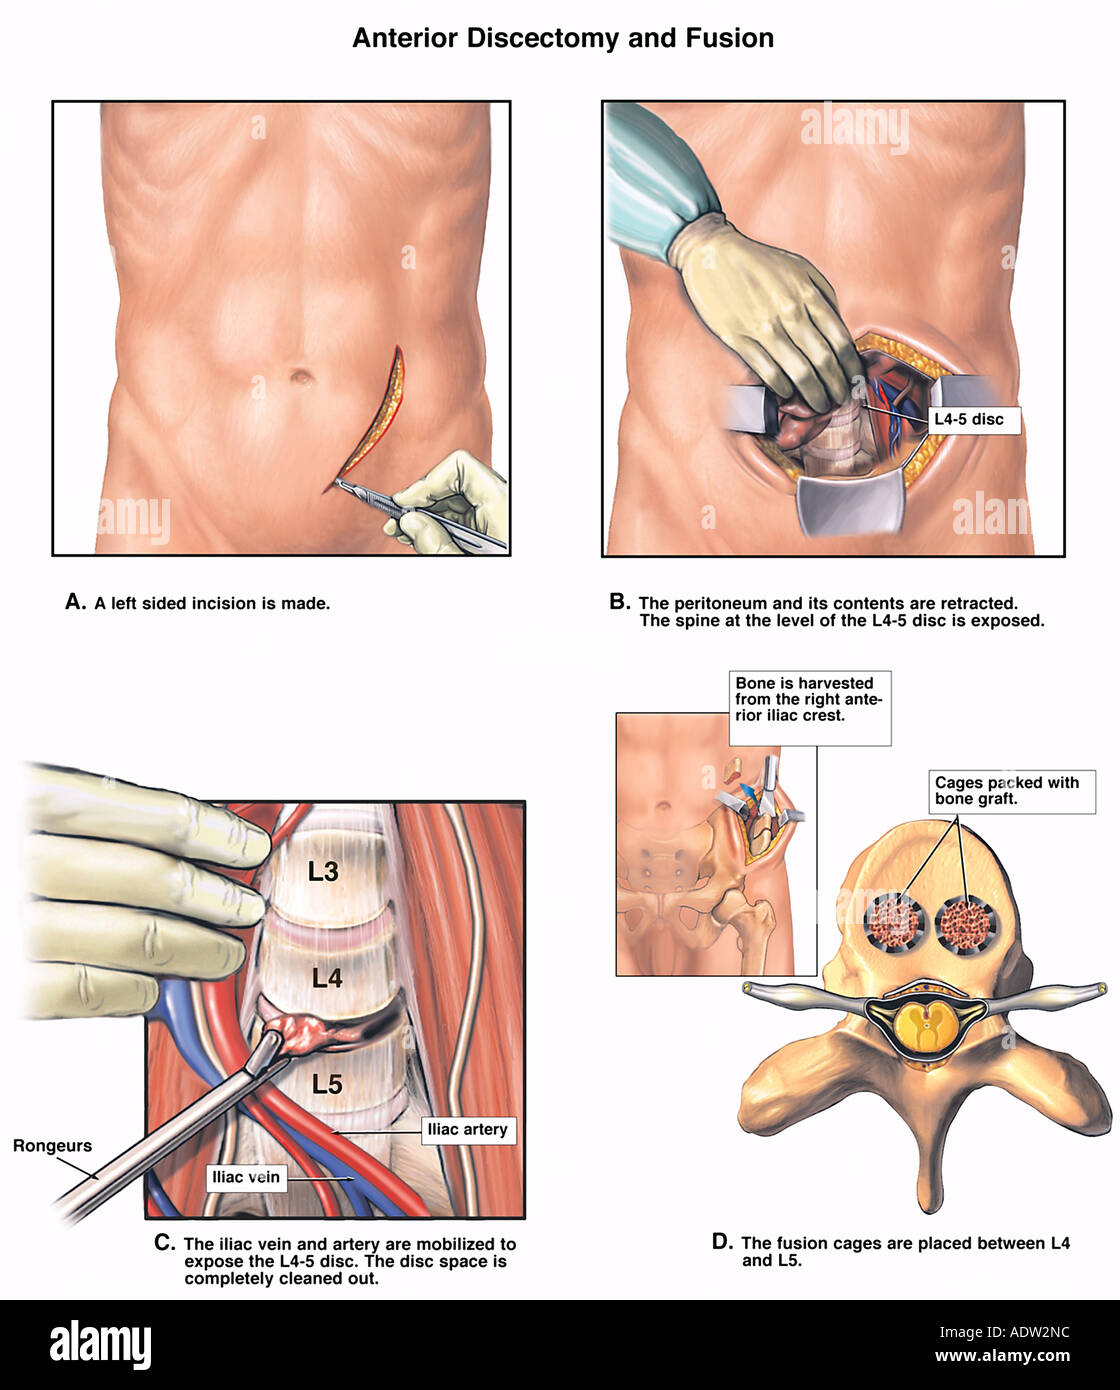 L4-5 Anterior Discectomy and Spinal Fusion Procedures Stock Photo